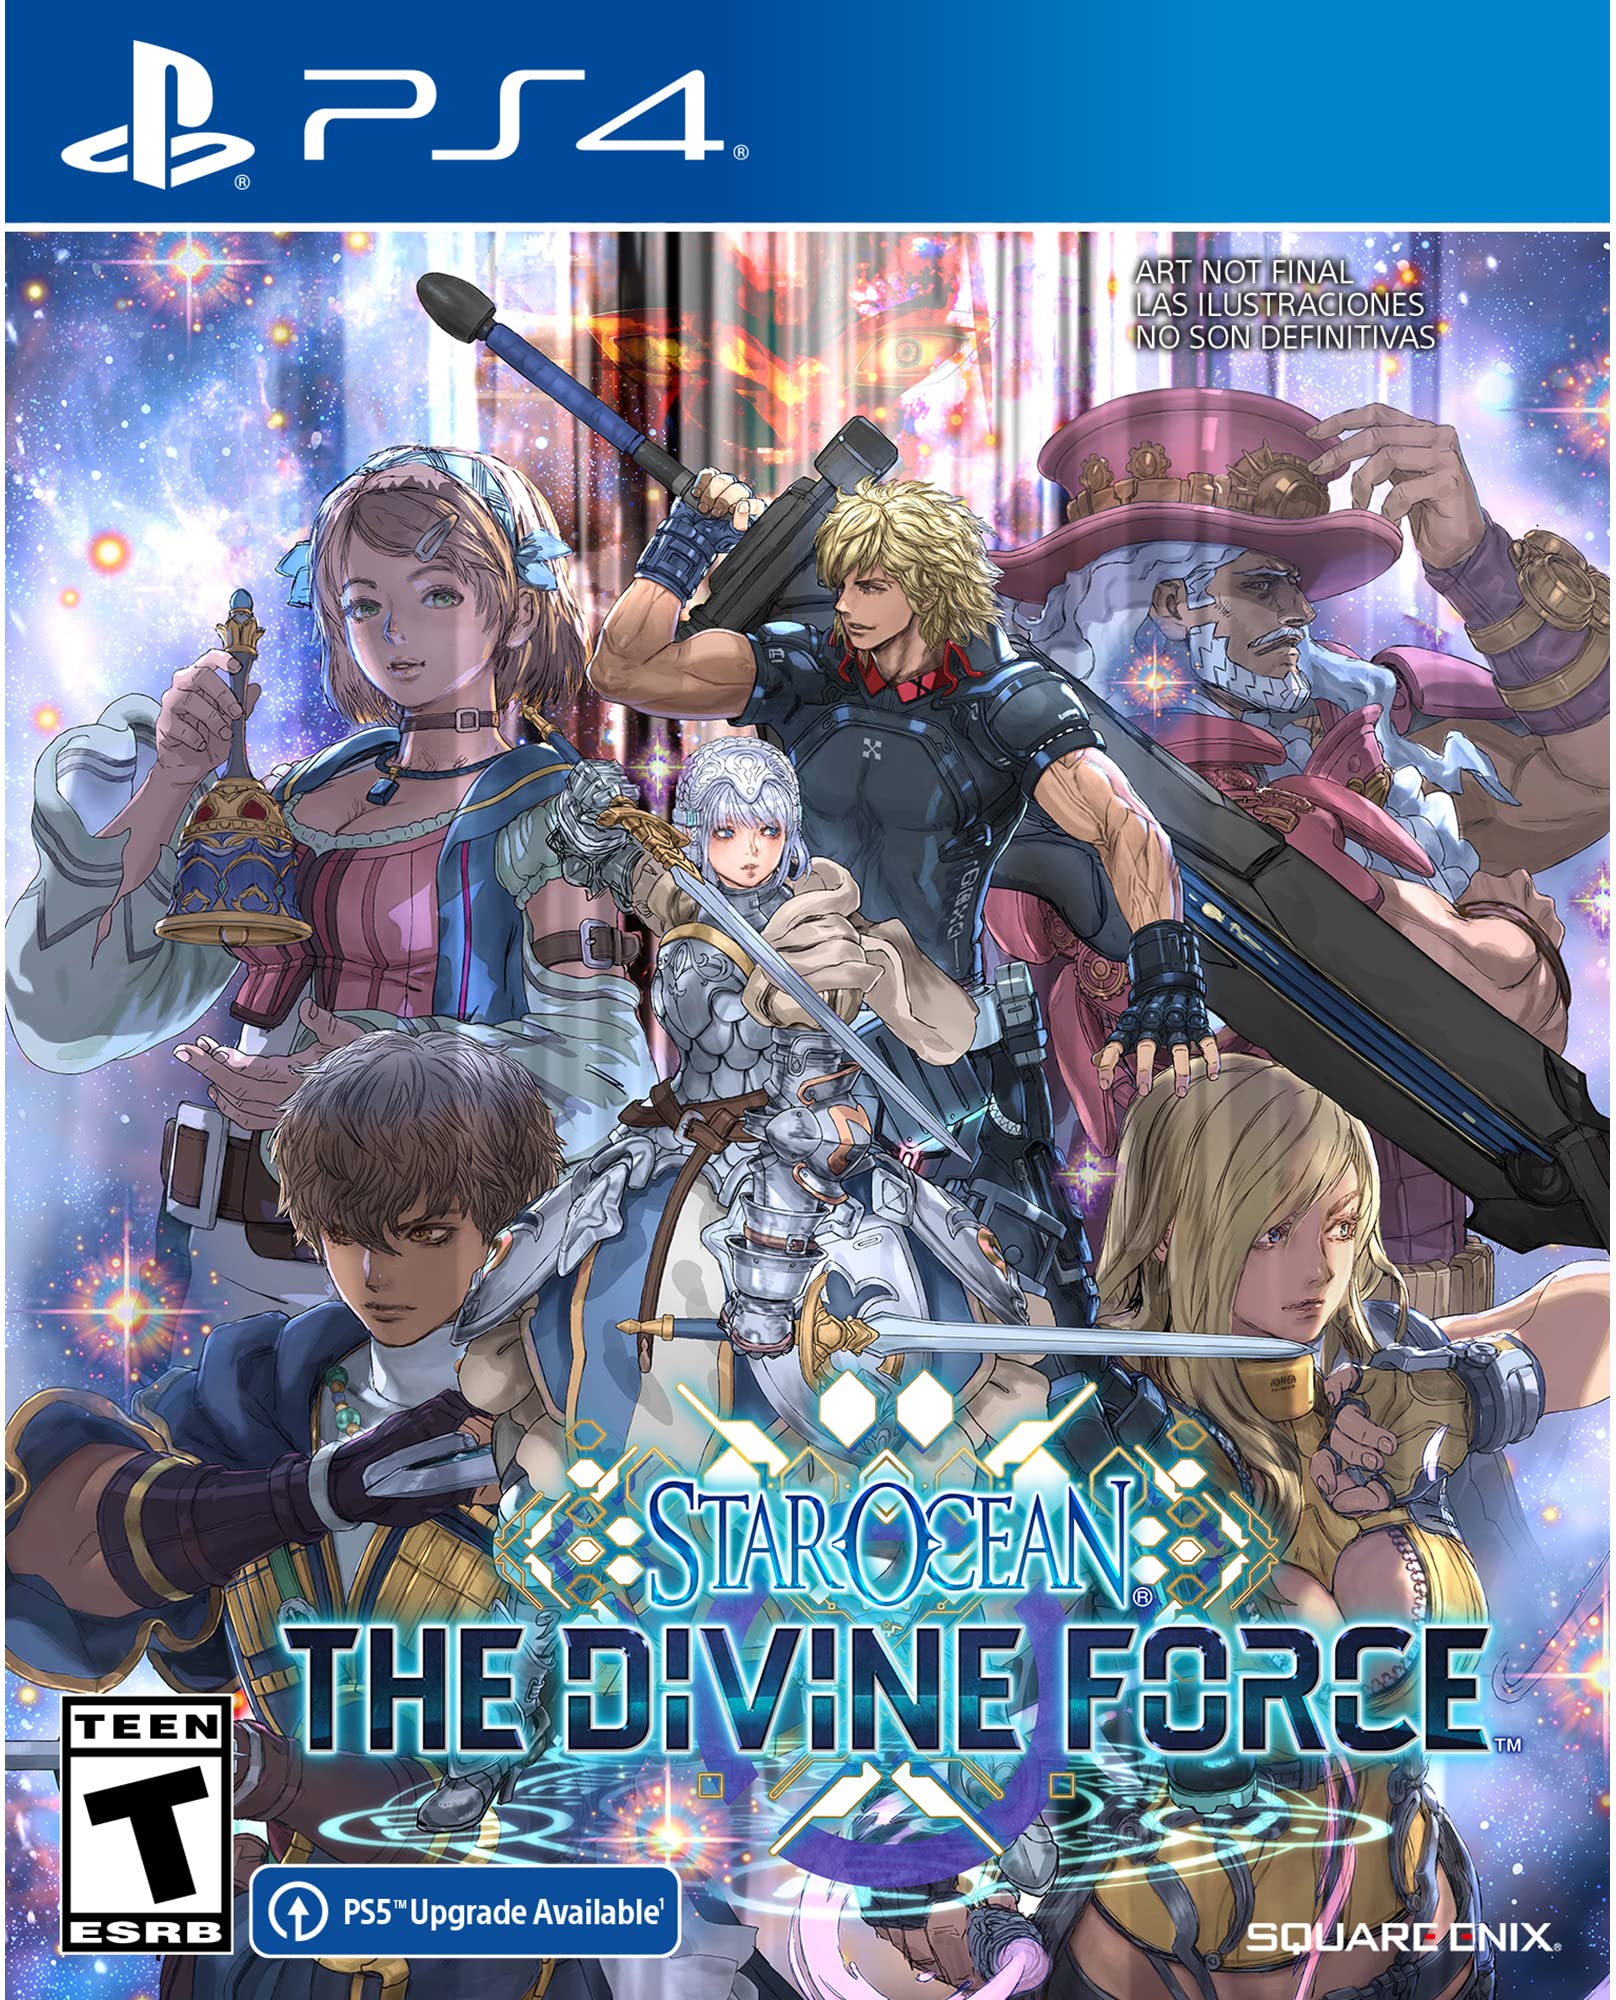 Star Ocean The Divine Force PlayStation 4 with Free Upgrade to the Digital PS5 Version